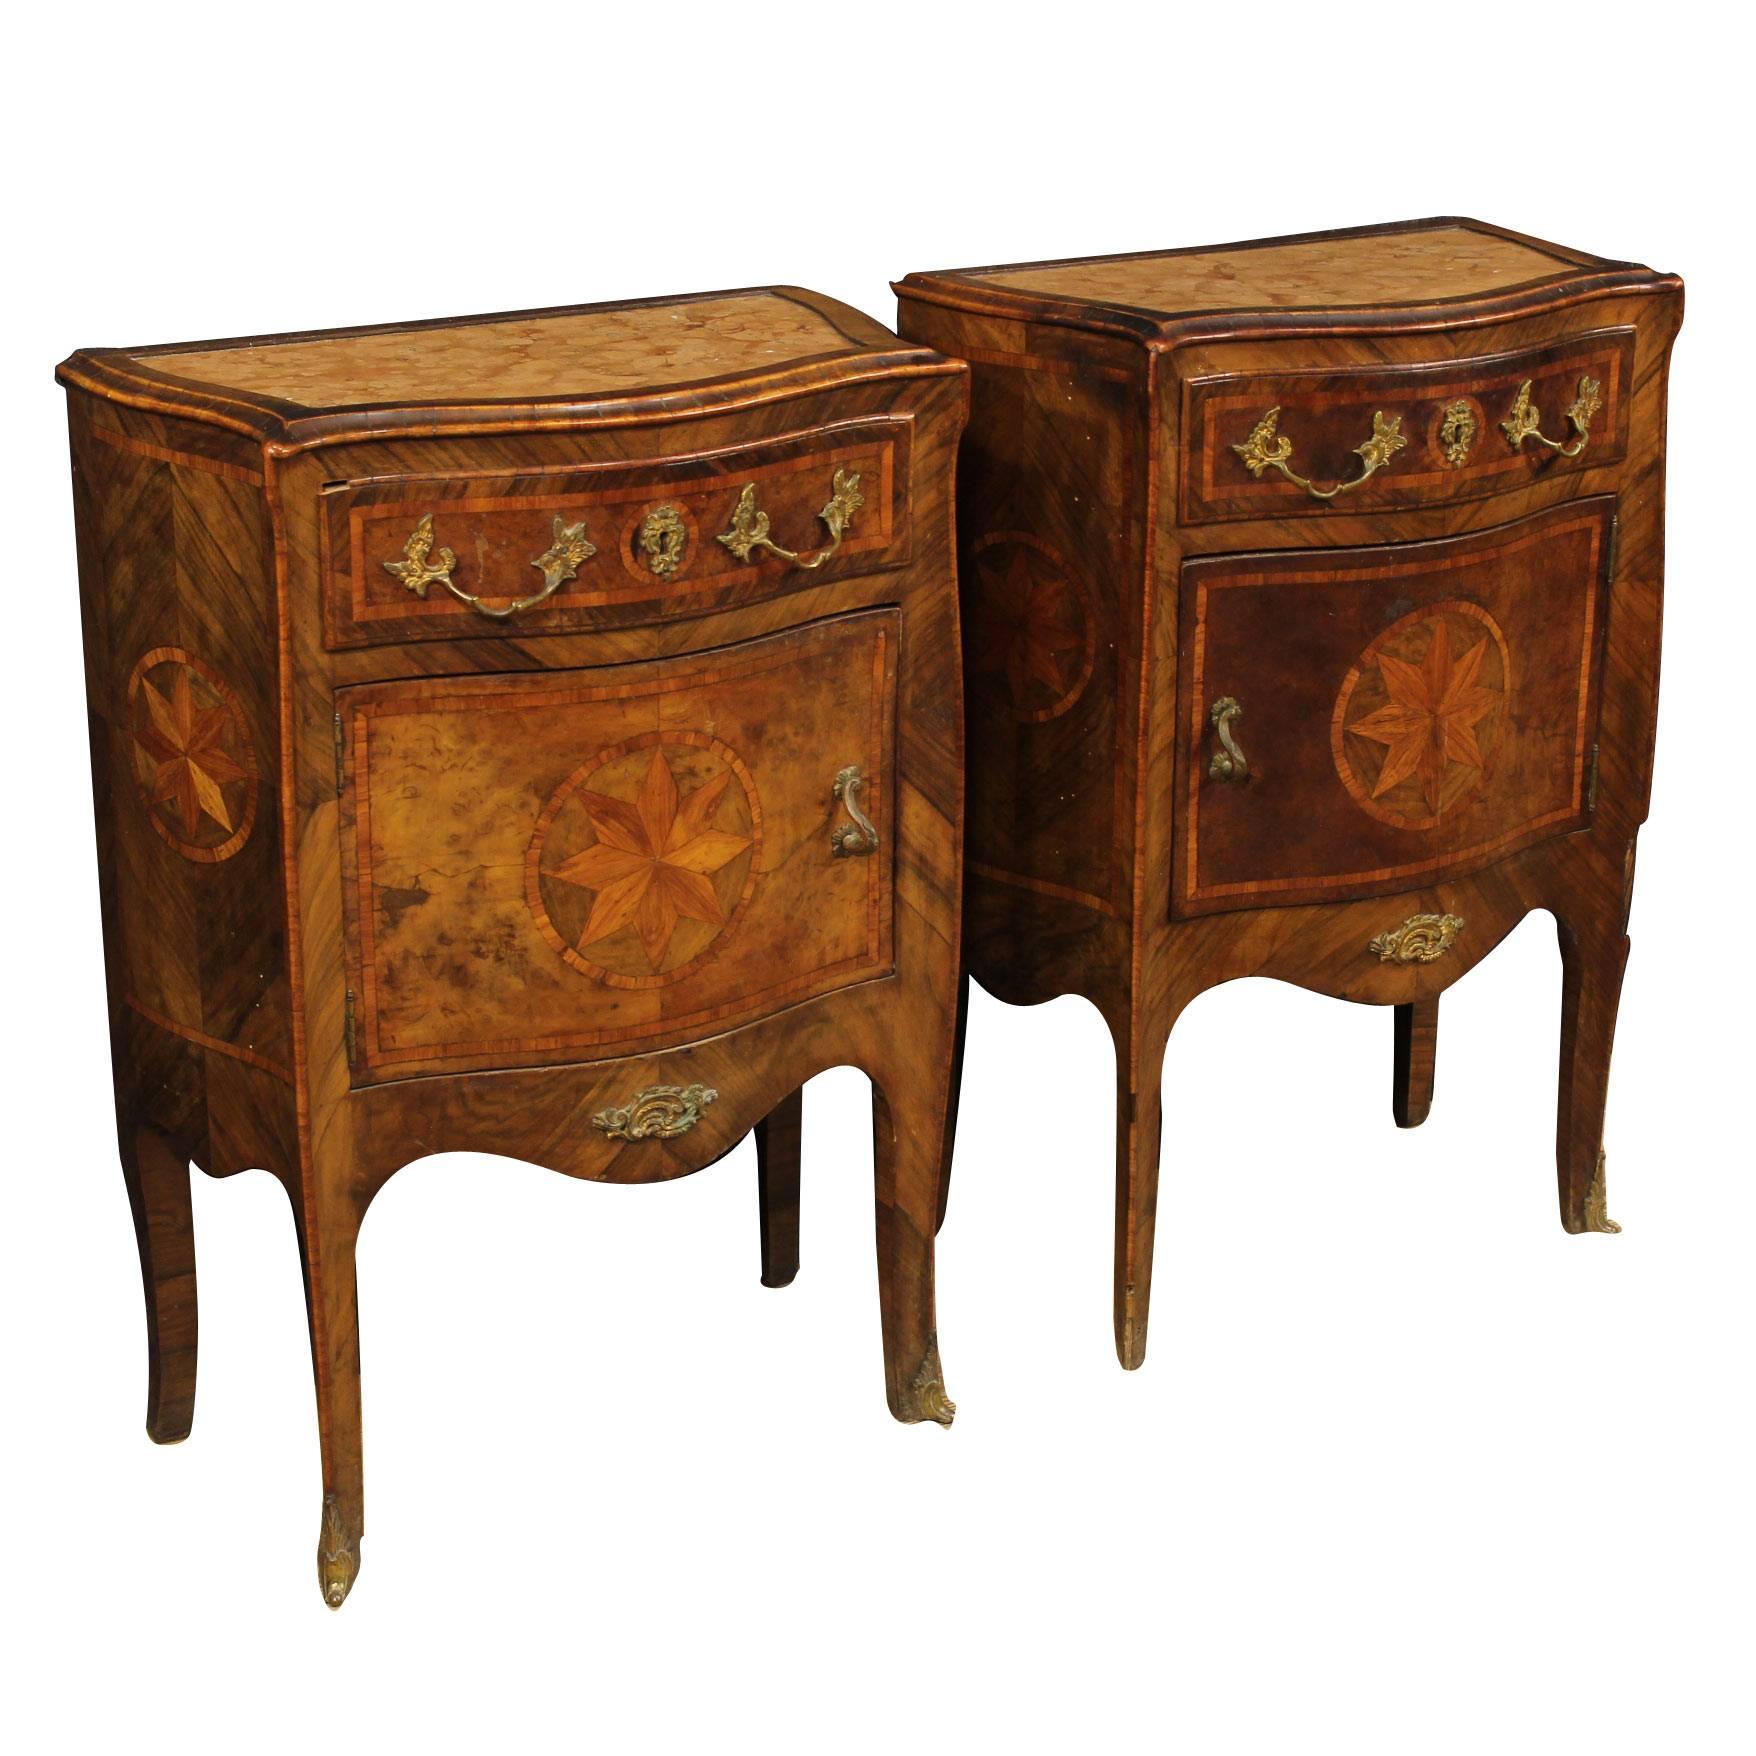 19th Century Inlaid Bedside Tables with Marble Top